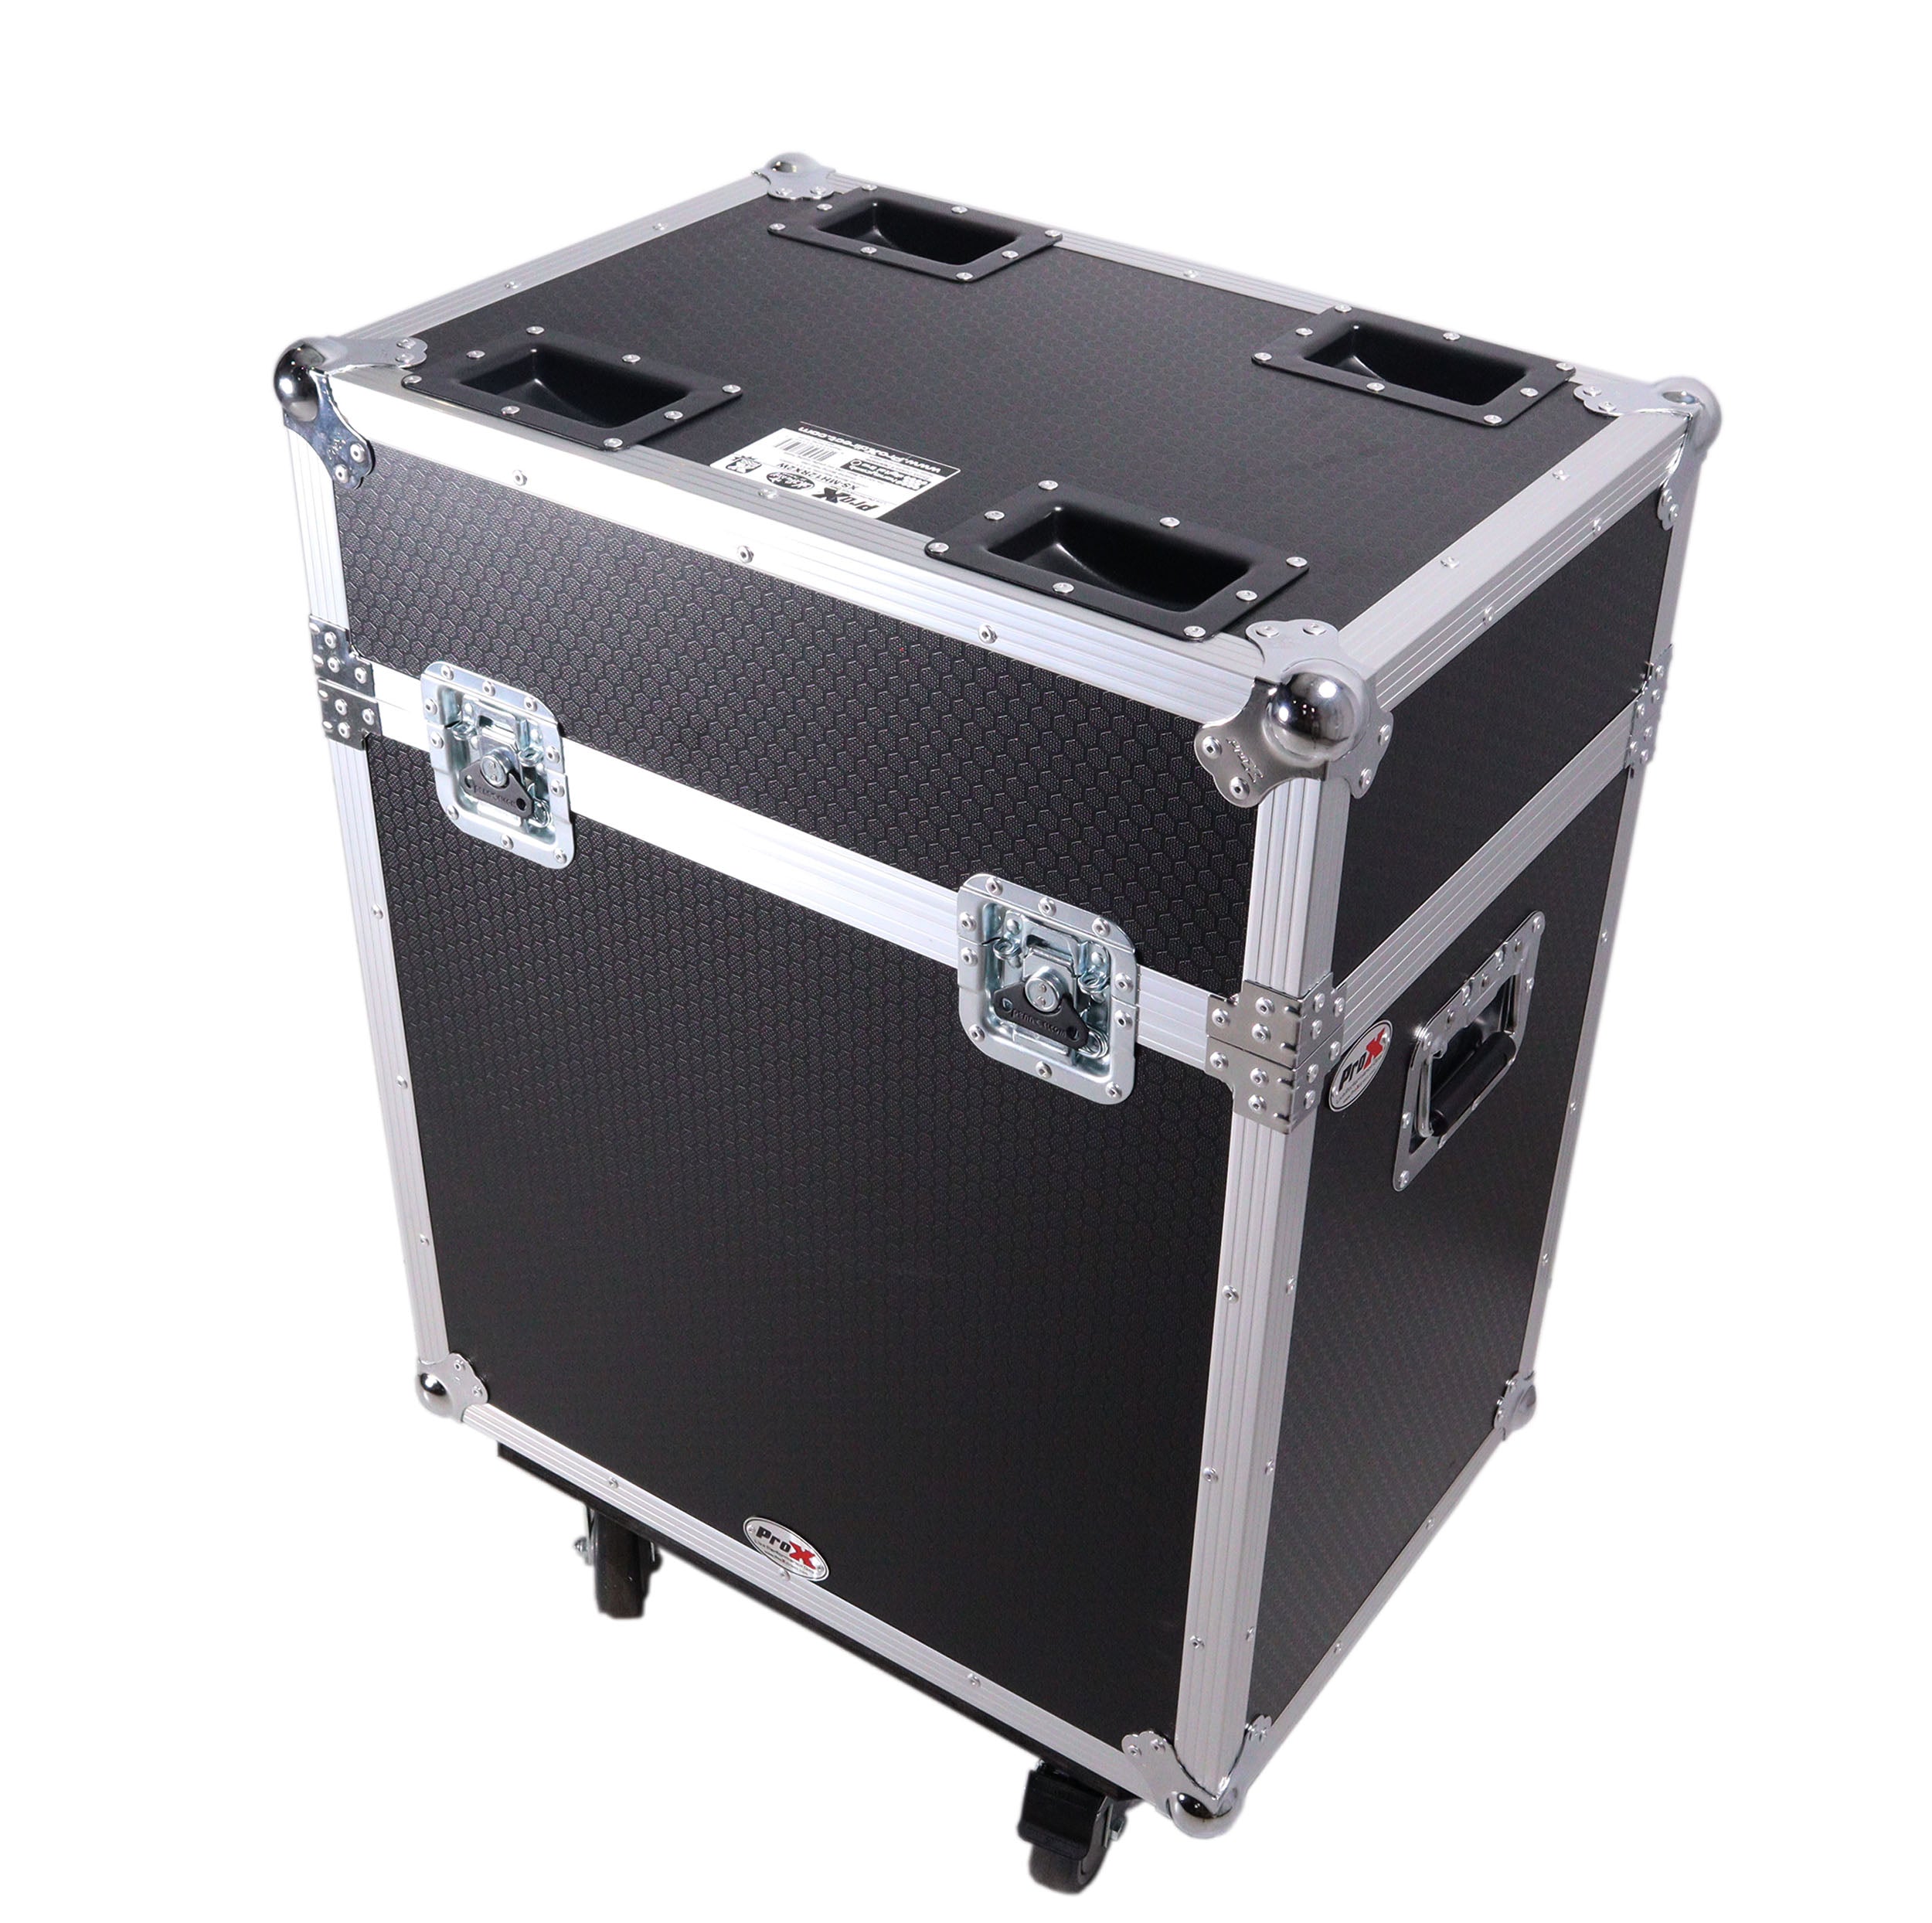 Pro X Moving Head Lighting Road Case for ADJ Hydro Beam X12 Vizi Beam 12RX Fits 2 Units with 4" Casters XS-MH12RX2W